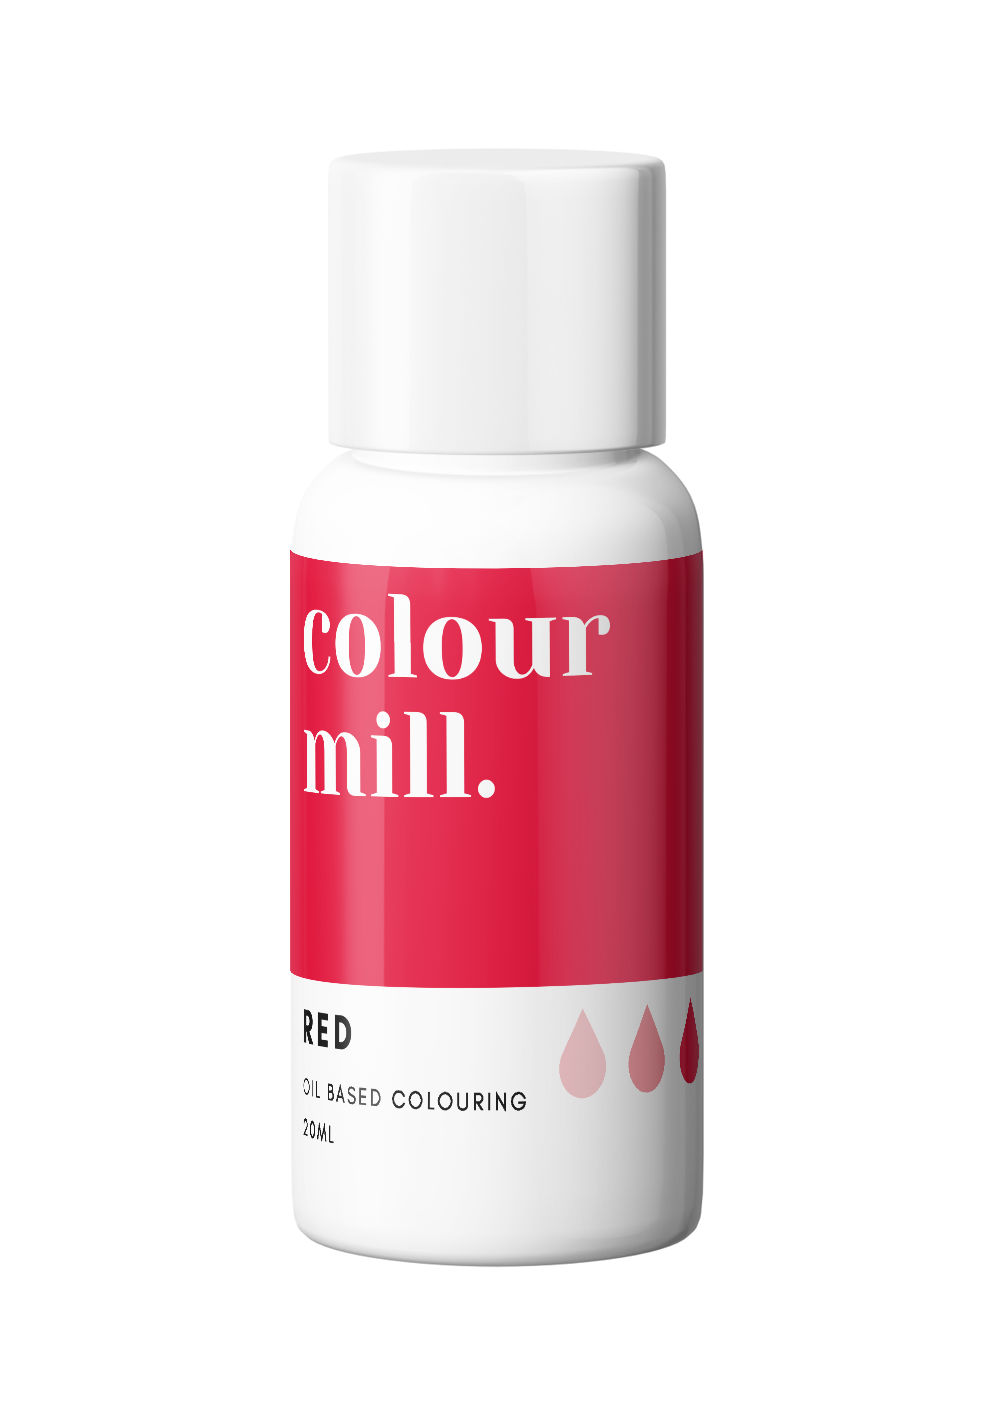 RED - 20ml Colour Mill